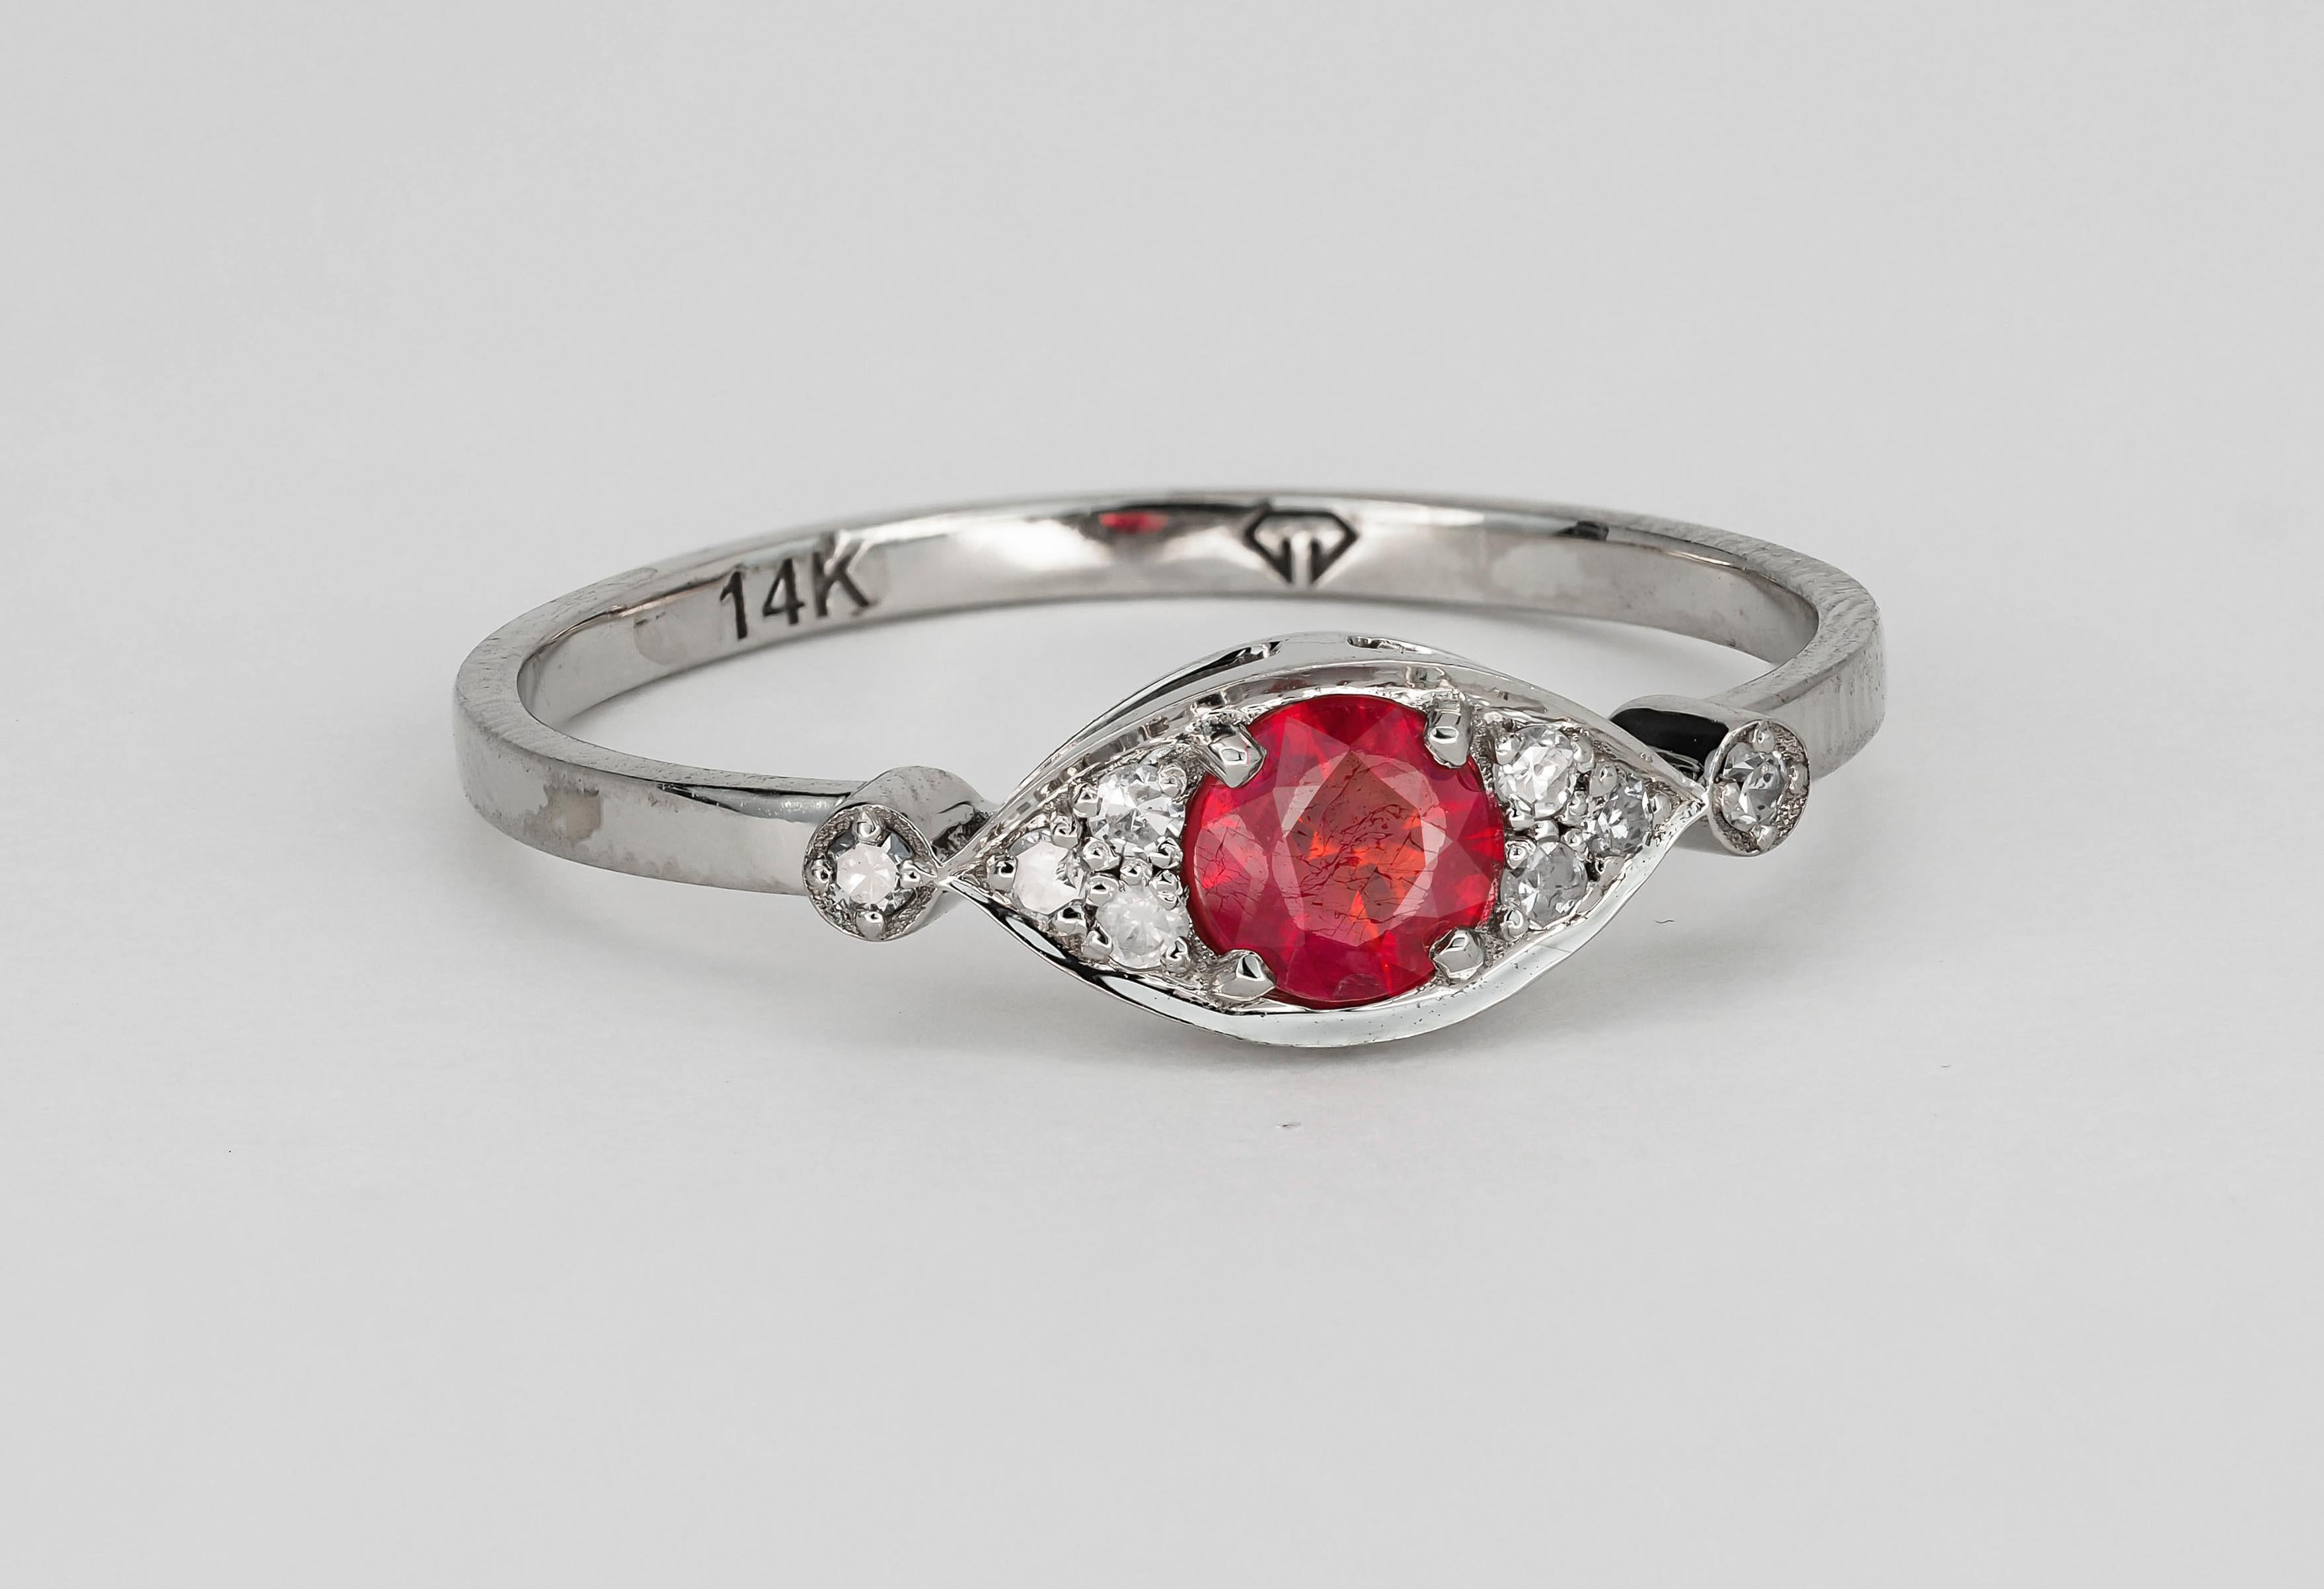 For Sale:  14 karat Gold Ring with Ruby and Diamonds.  